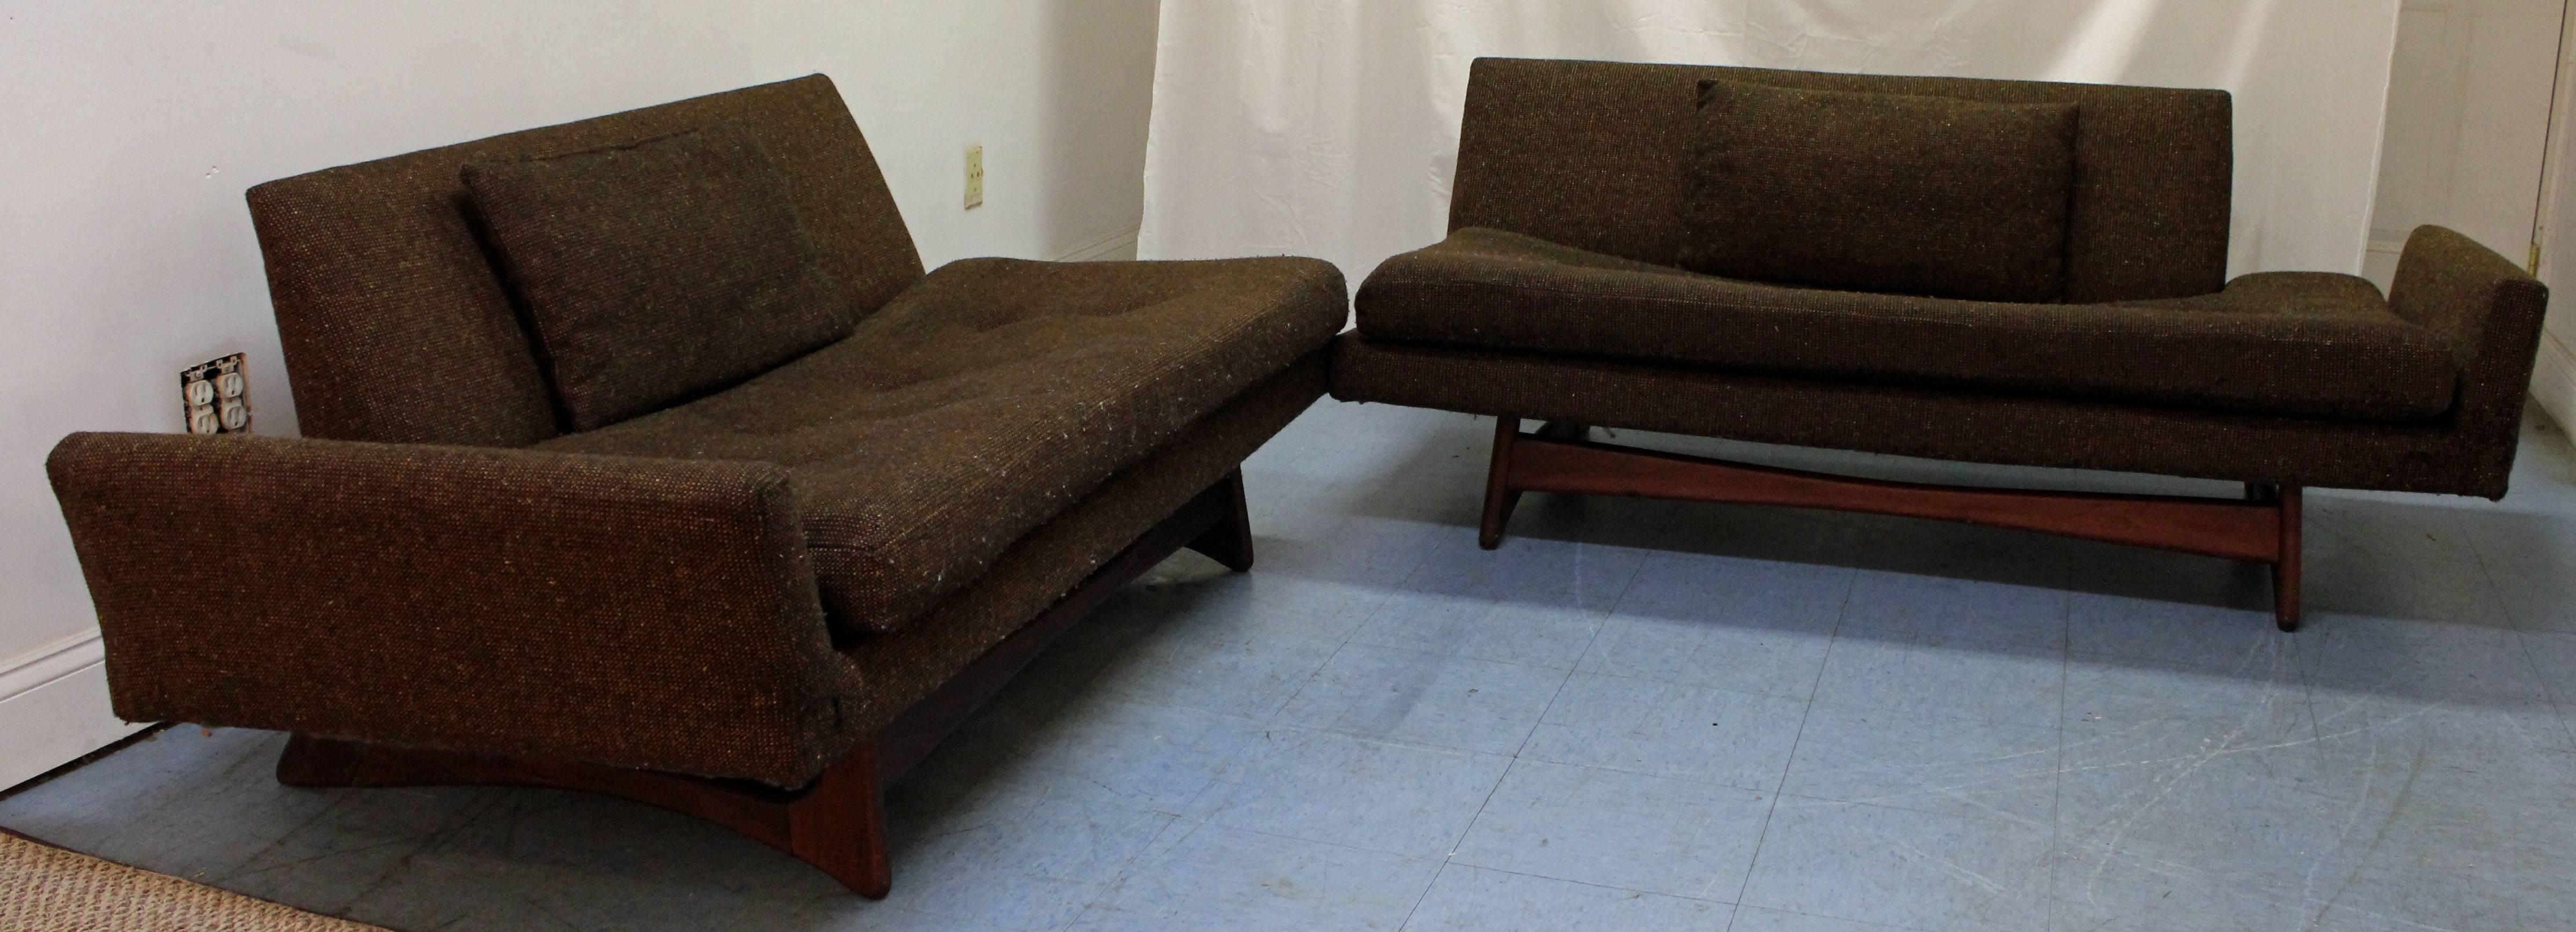 This is an original, rare sectional sofa by Adrian Pearsall. Features a walnut sculpted base. Base is in good condition, but needs reupholstering.

Seat height: 16.5